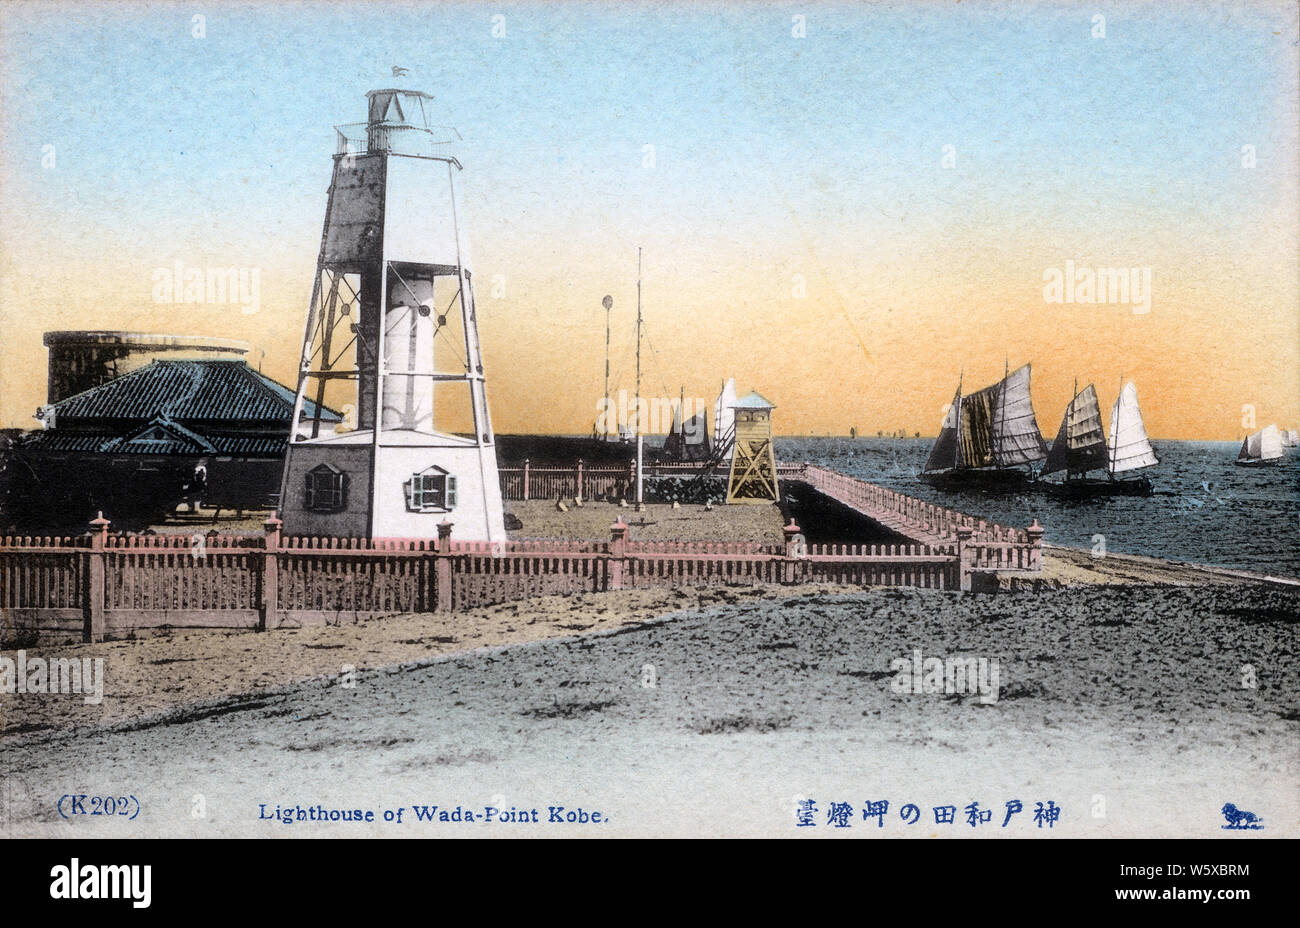 [ 1900s Japan - Lighthouse and Boats, Kobe ] —   The lighthouse at Wadamisaki (和田岬灯台) in Kobe, Hyogo Prefecture was activated in 1884 (Meiji 17). It replaced an earlier wooden structure dating from 1871 (Meiji 4), designed by the Scottish engineer Richard Henry Brunton (1841–1901), the 'Father of Japanese lighthouses' (日本の灯台の父). Wadamisaki Lighthouse was relocated as a historic monument to Suma Seaside Park (須磨海浜公園) in 1964 (Showa 39) and still stands today.  20th century vintage postcard. Stock Photo